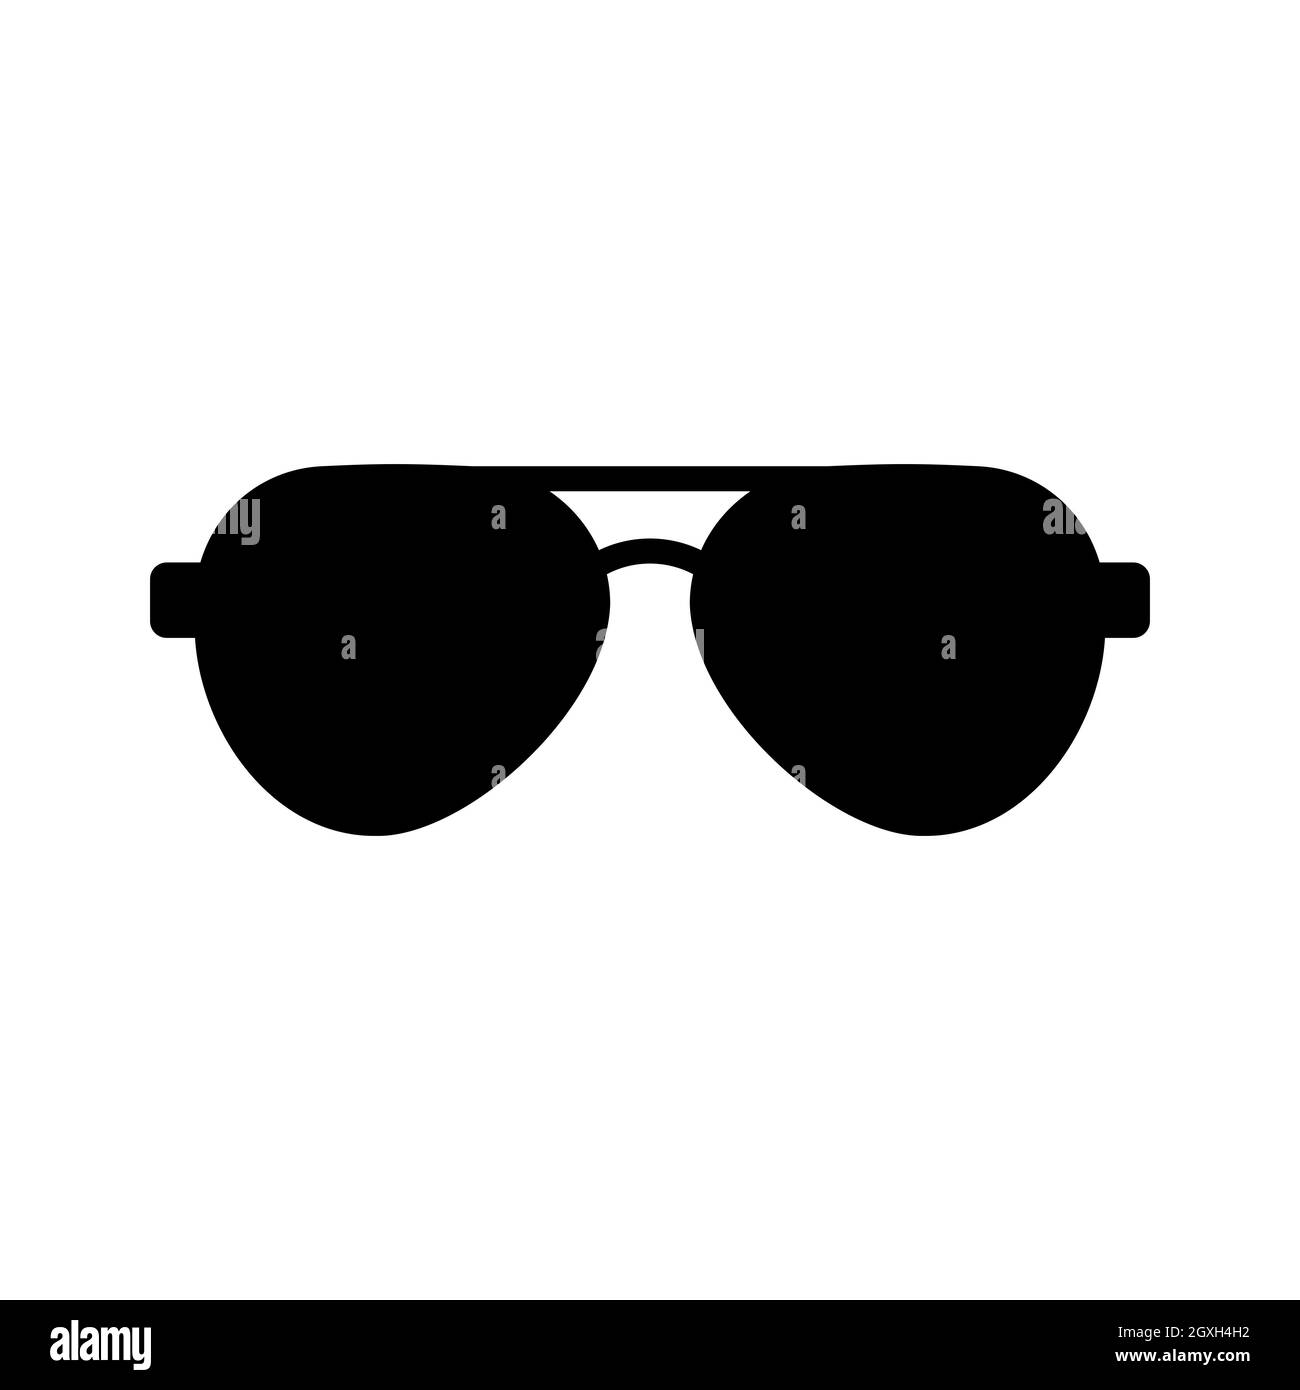 A Pair Of Glasses On A White Background, Sunglasses, Accessories, Fashion  Background Image And Wallpaper for Free Download